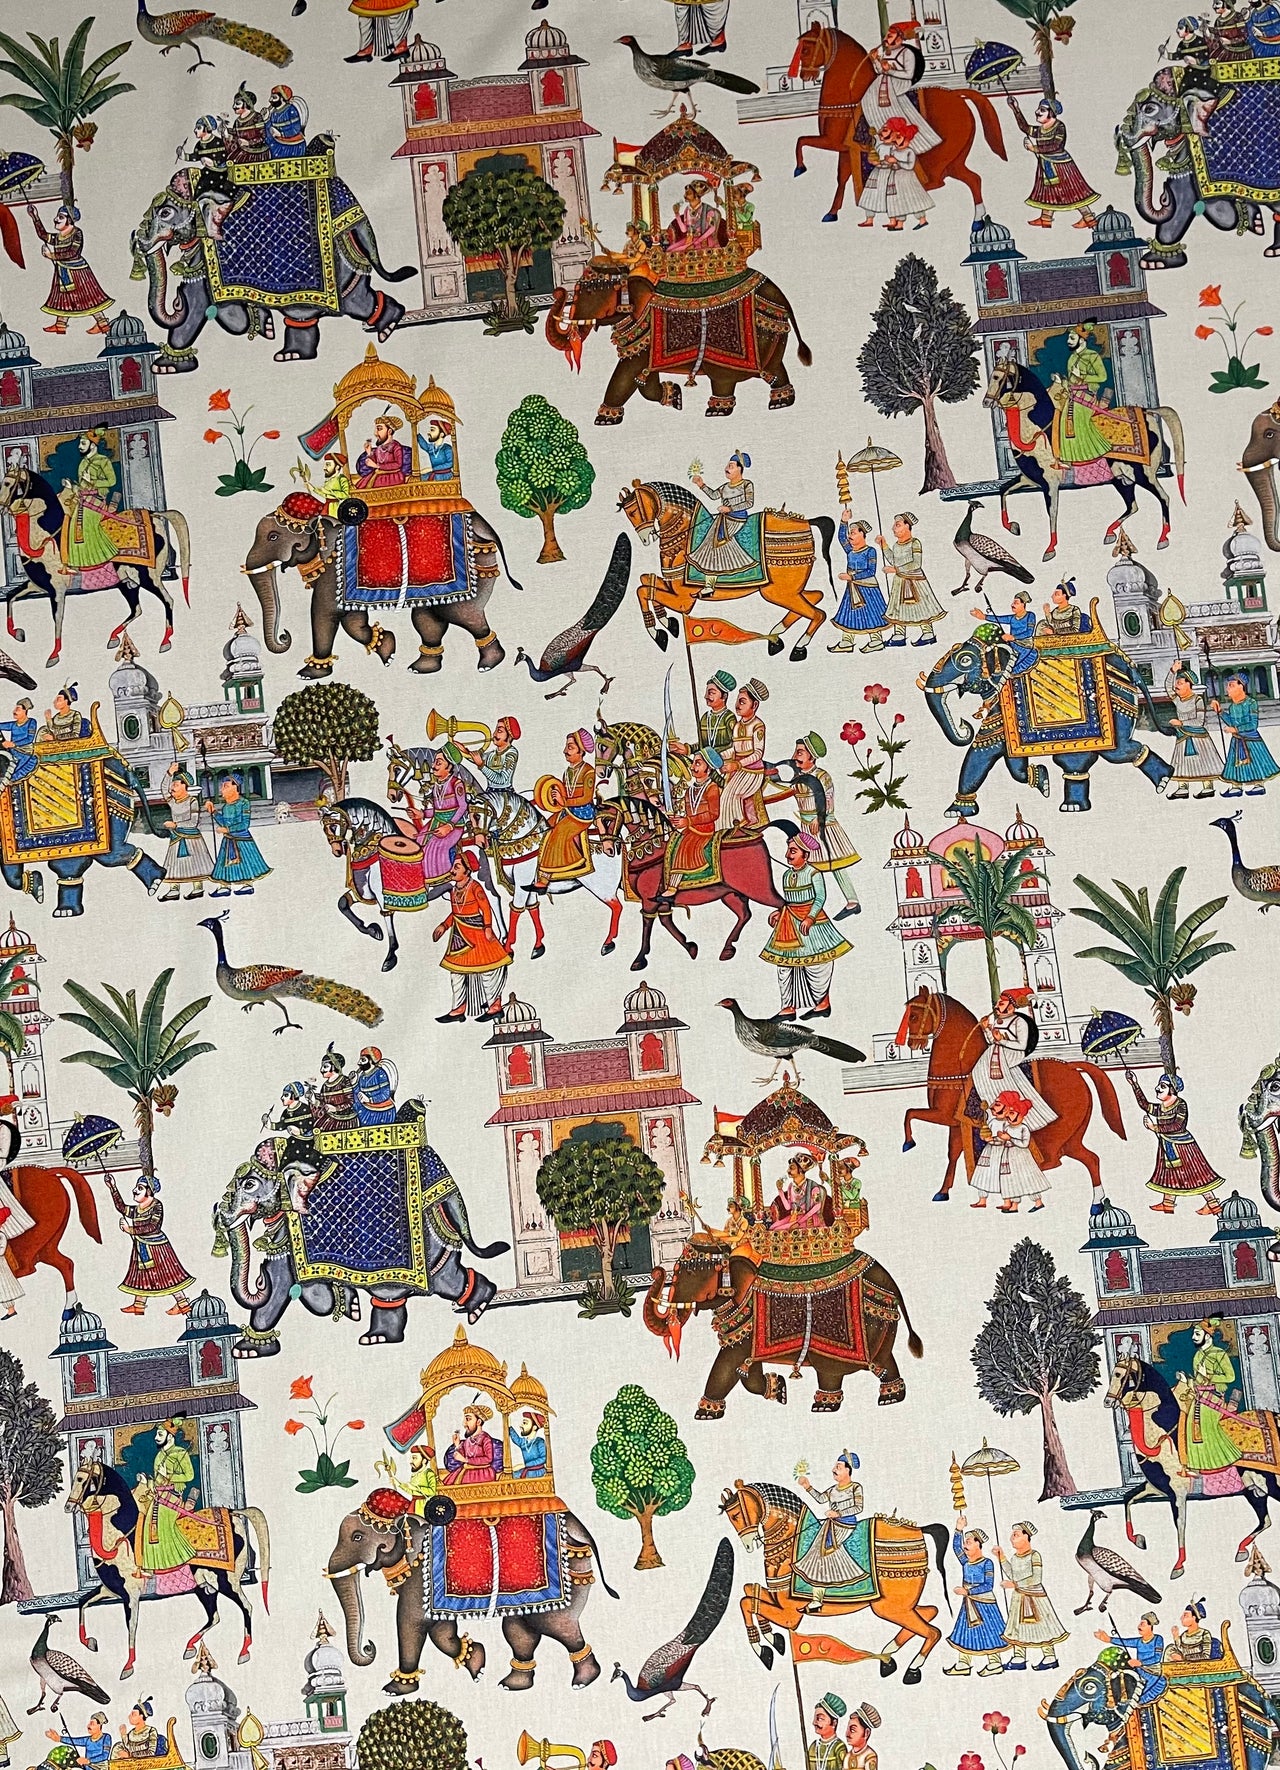 Custom - Made to Measure Roman Blinds - Jaipur Pattern with Off-White Cotton Fabric featuring Elephants, Palm Trees, Birds, and Animals